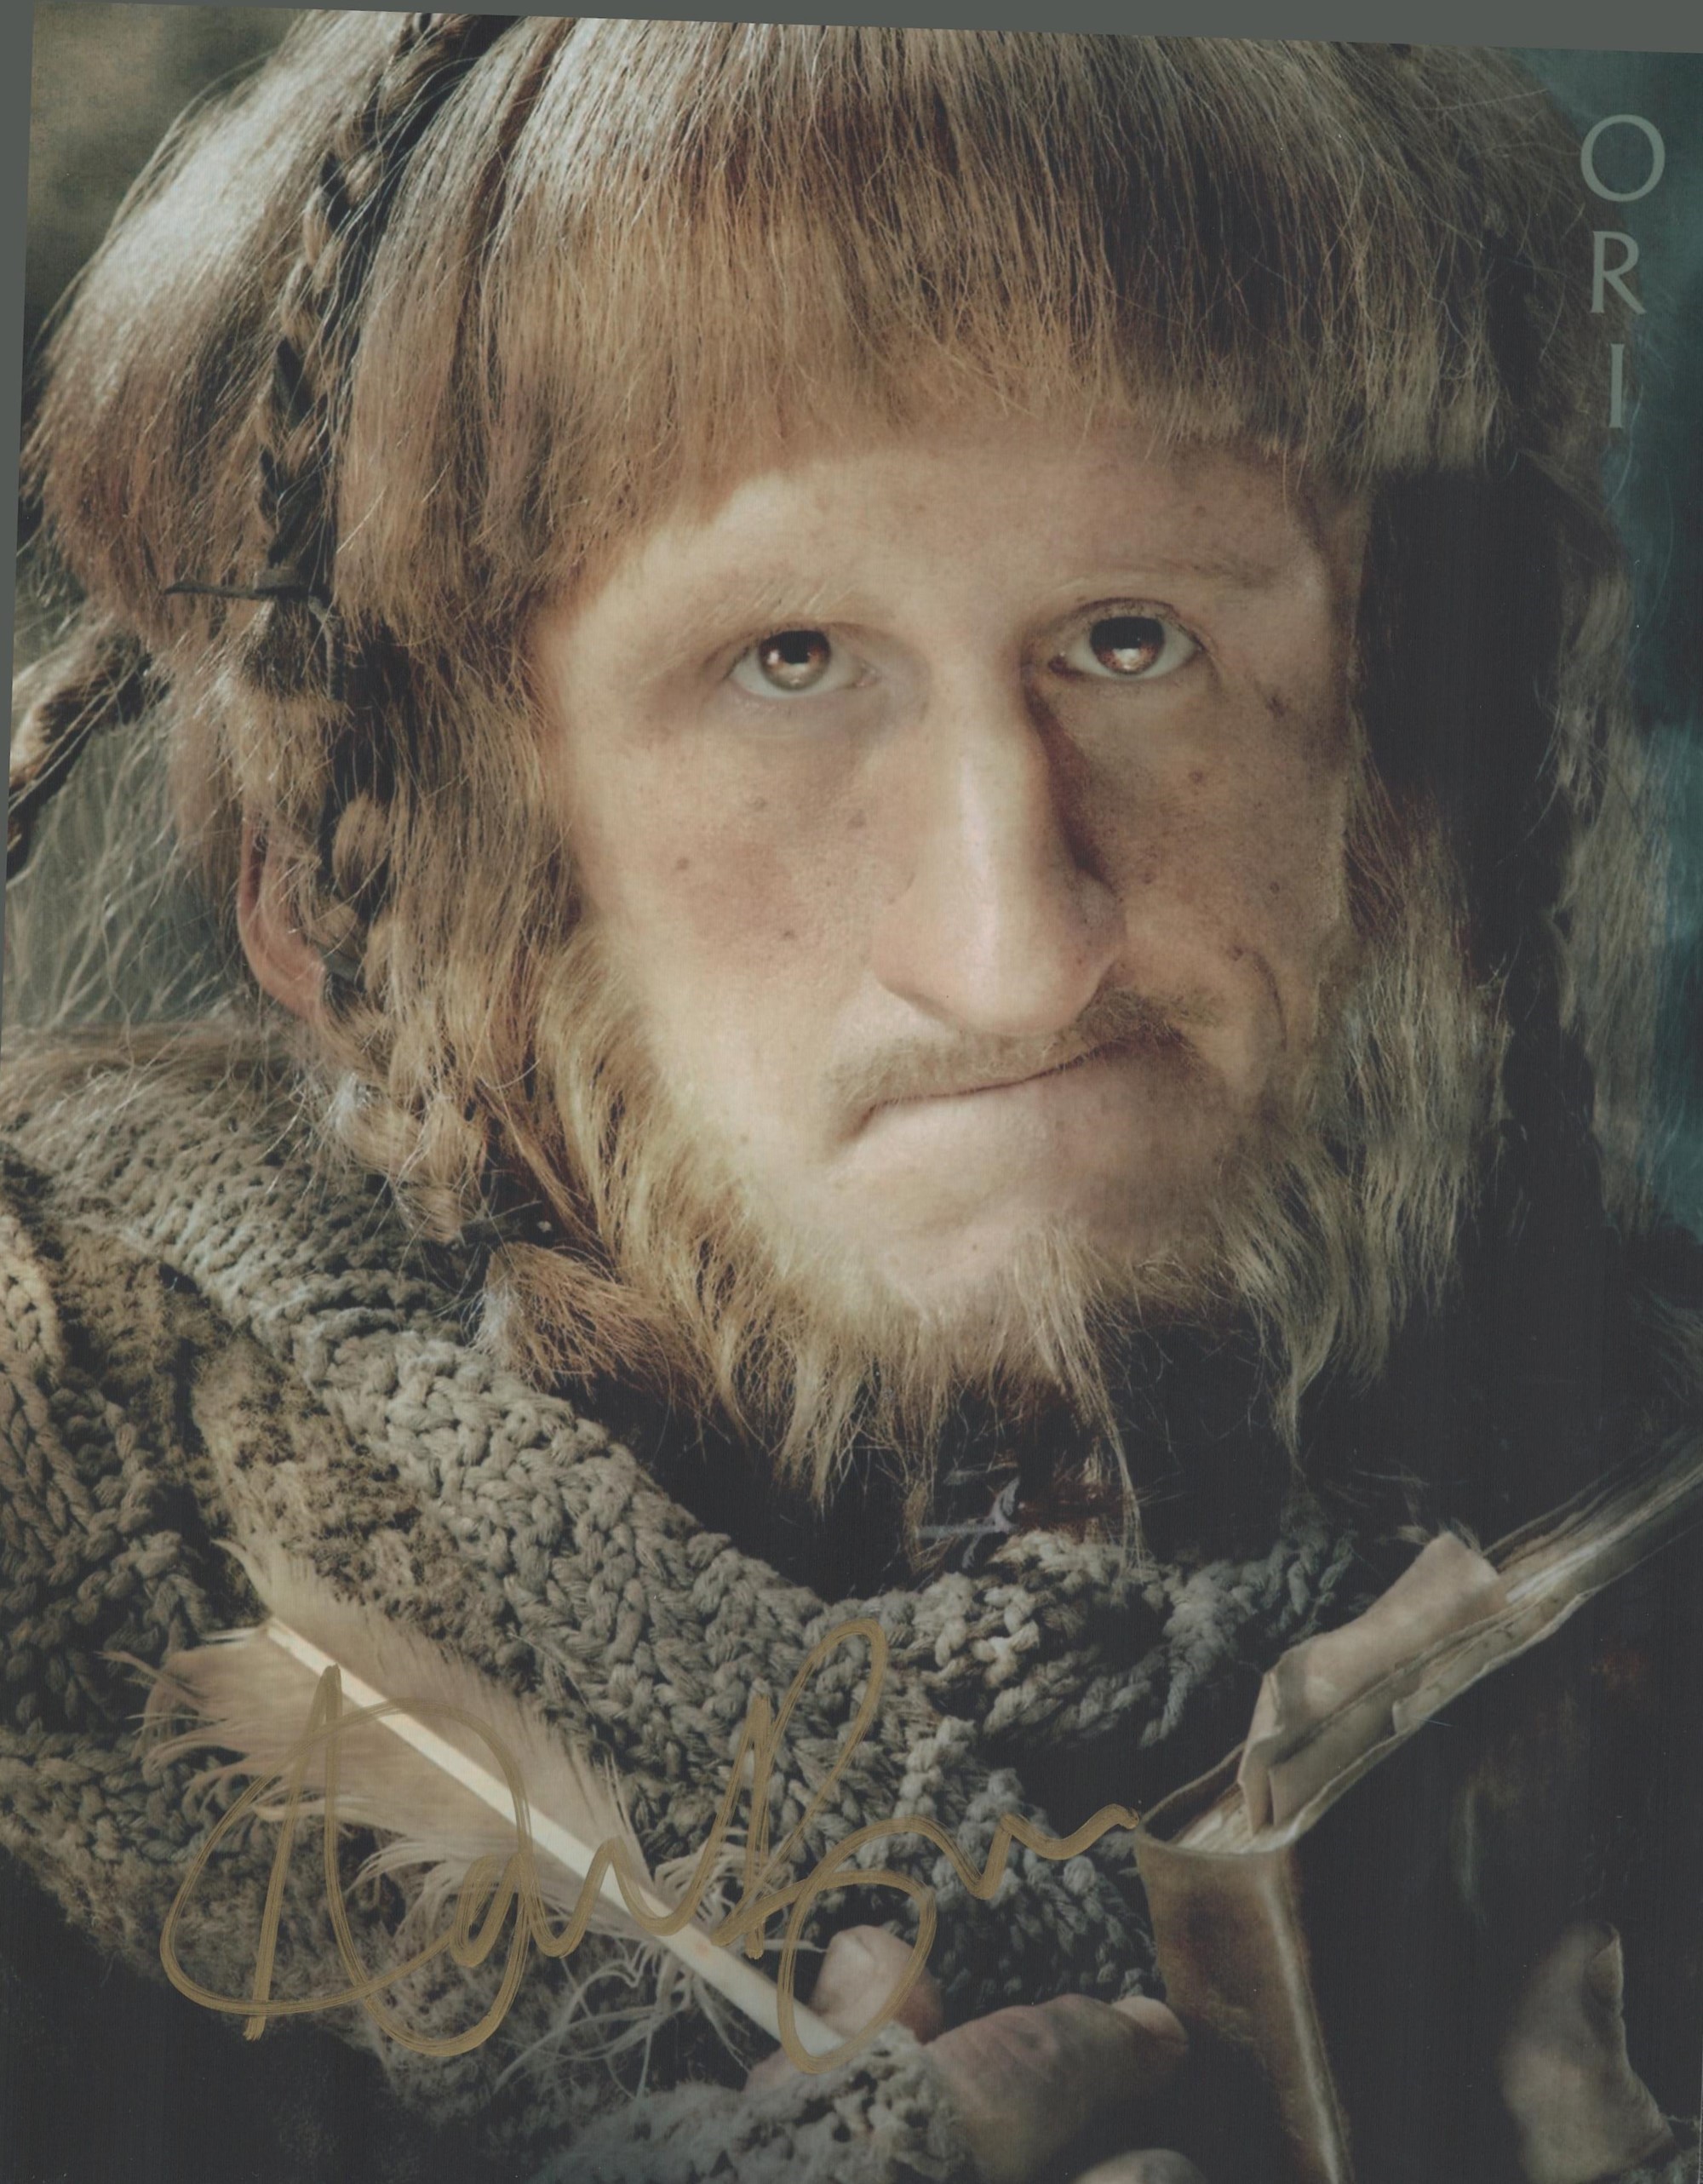 Lord Of The Rings Actor, Adam Brown signed 10x8 photograph. Brown (born 29 May 1980) is an English